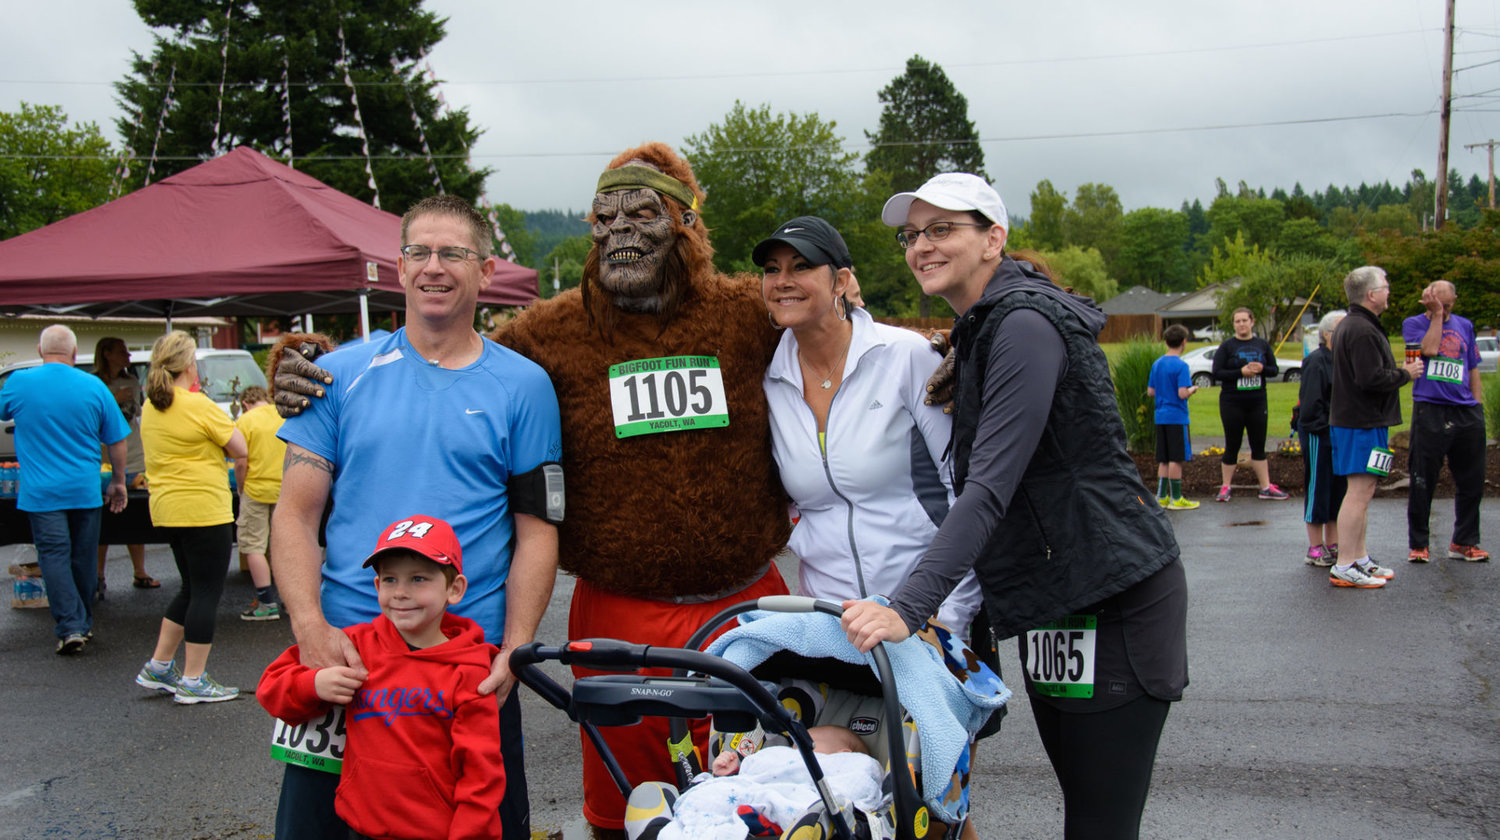 If the namesake of Yacolt’s annual Bigfoot Fun Run is any indication, the cryptid also known as Sasquatch has a big following in Washington as seen here in a photo from a previous run. Playing into the popularity, state Sen. Ann Rivers, R-La Center, has introduced legislation to make specialty Sasquatch-branded license plates to help fund maintenance operations in Washington state parks.